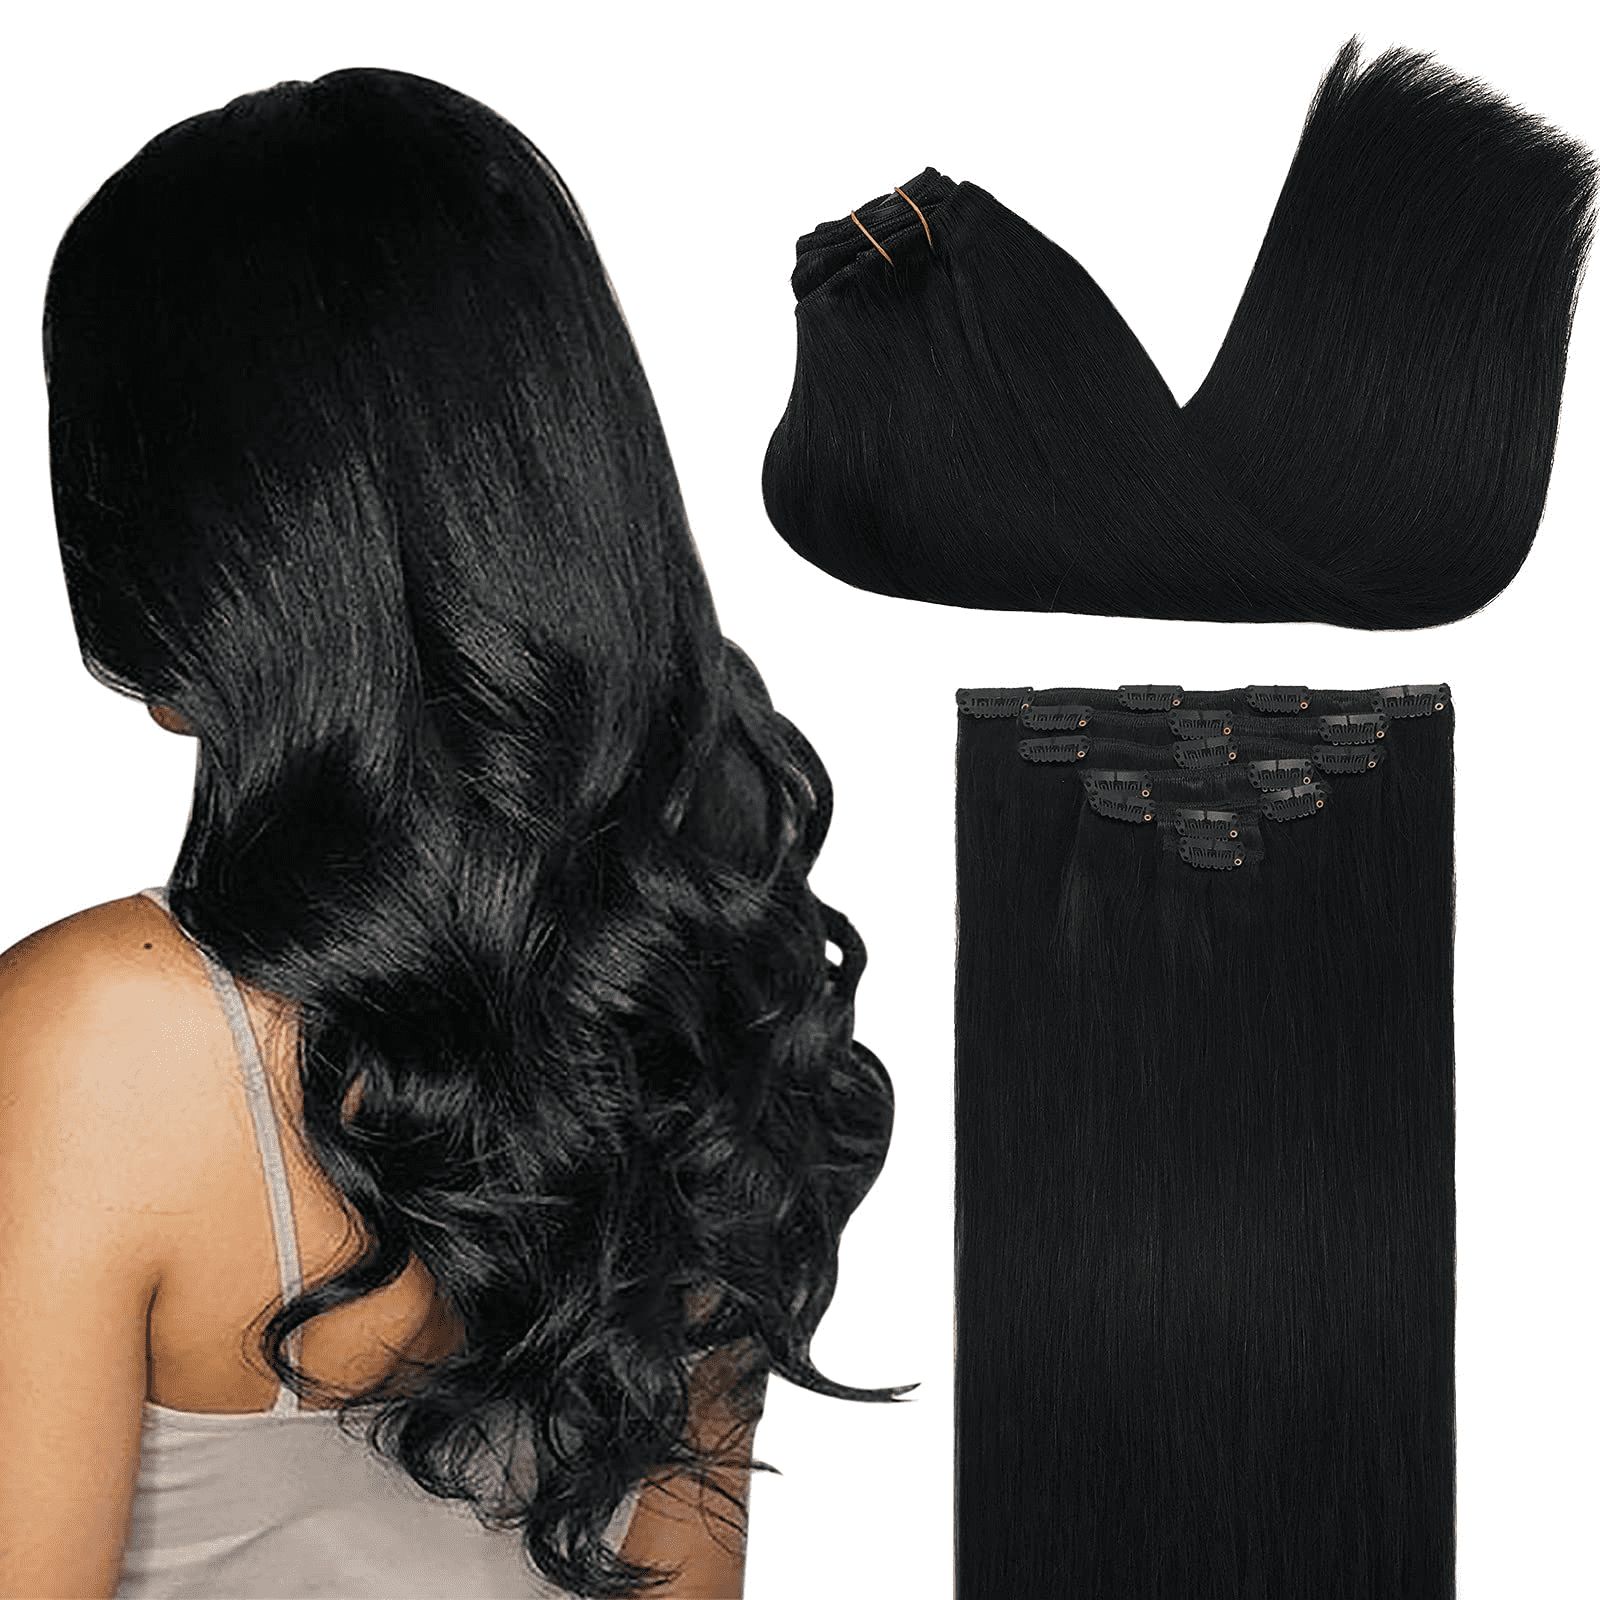 LeaLea Clip In Hair Extensions Human Hair Thickened Double Weft Remy Hair  120g 7pcs, Jet Black Full Head Silky Straight 24 inch 